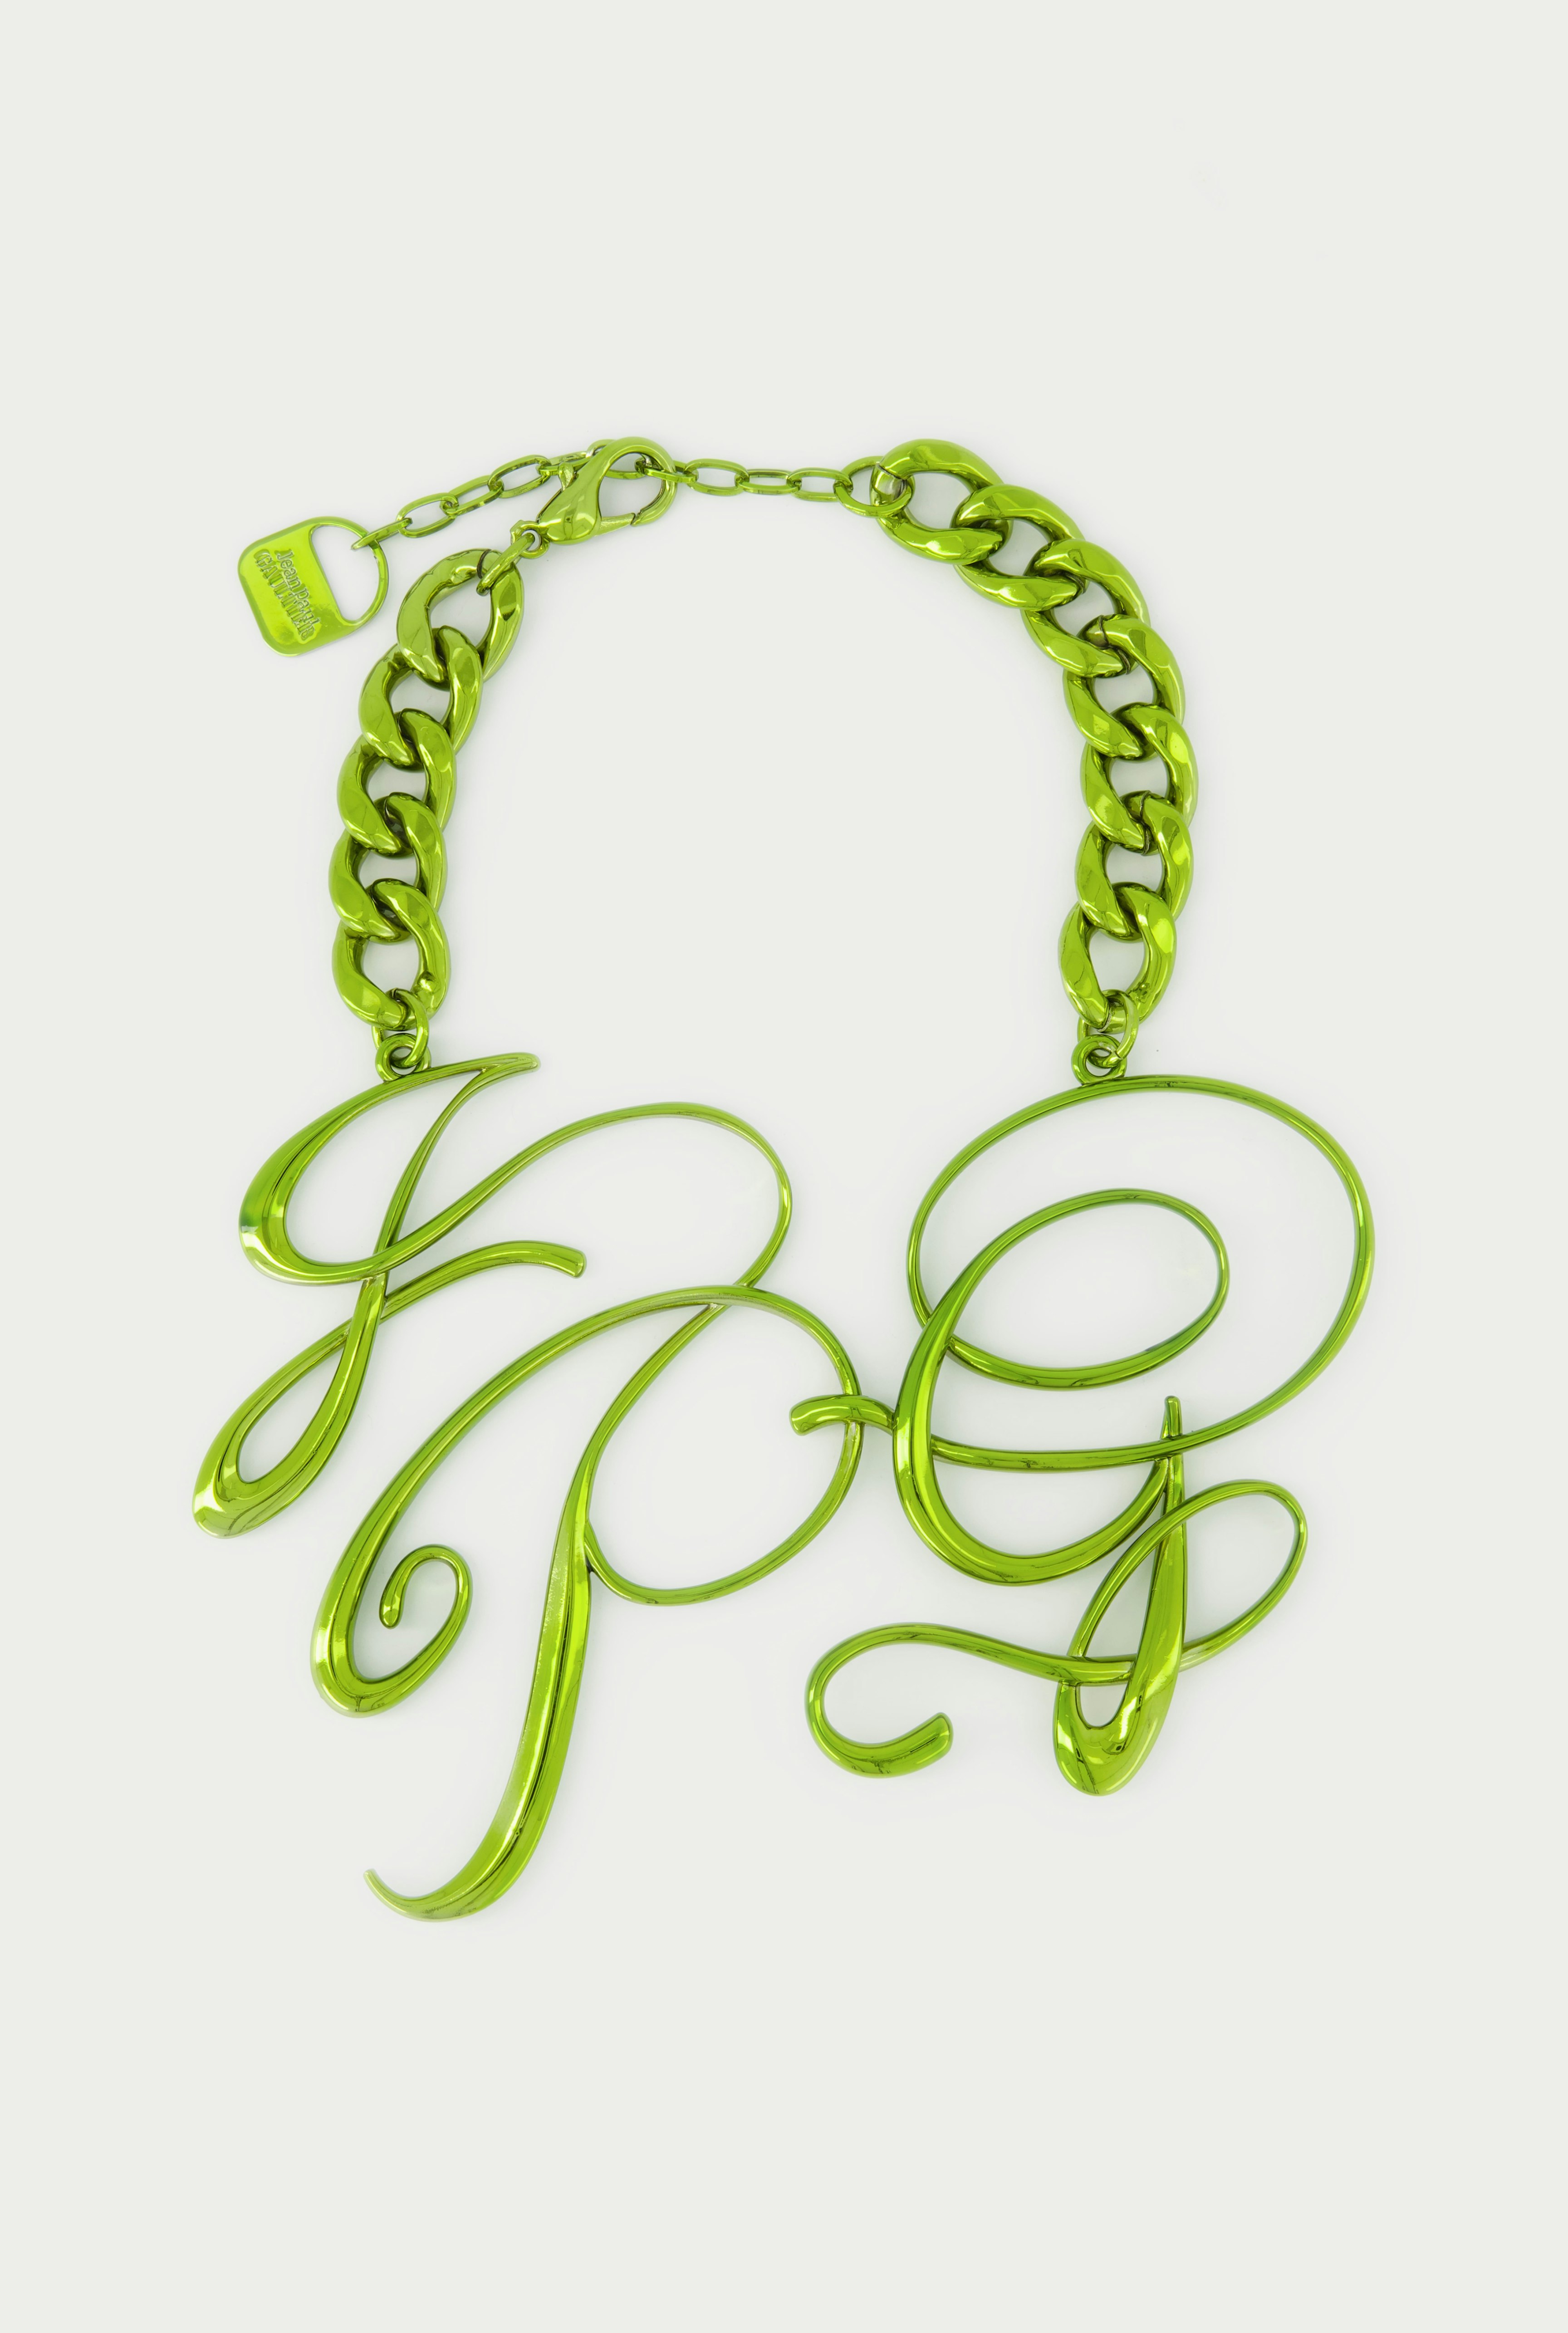 The JPG Calligraphy Necklace Jean Paul Gaultier